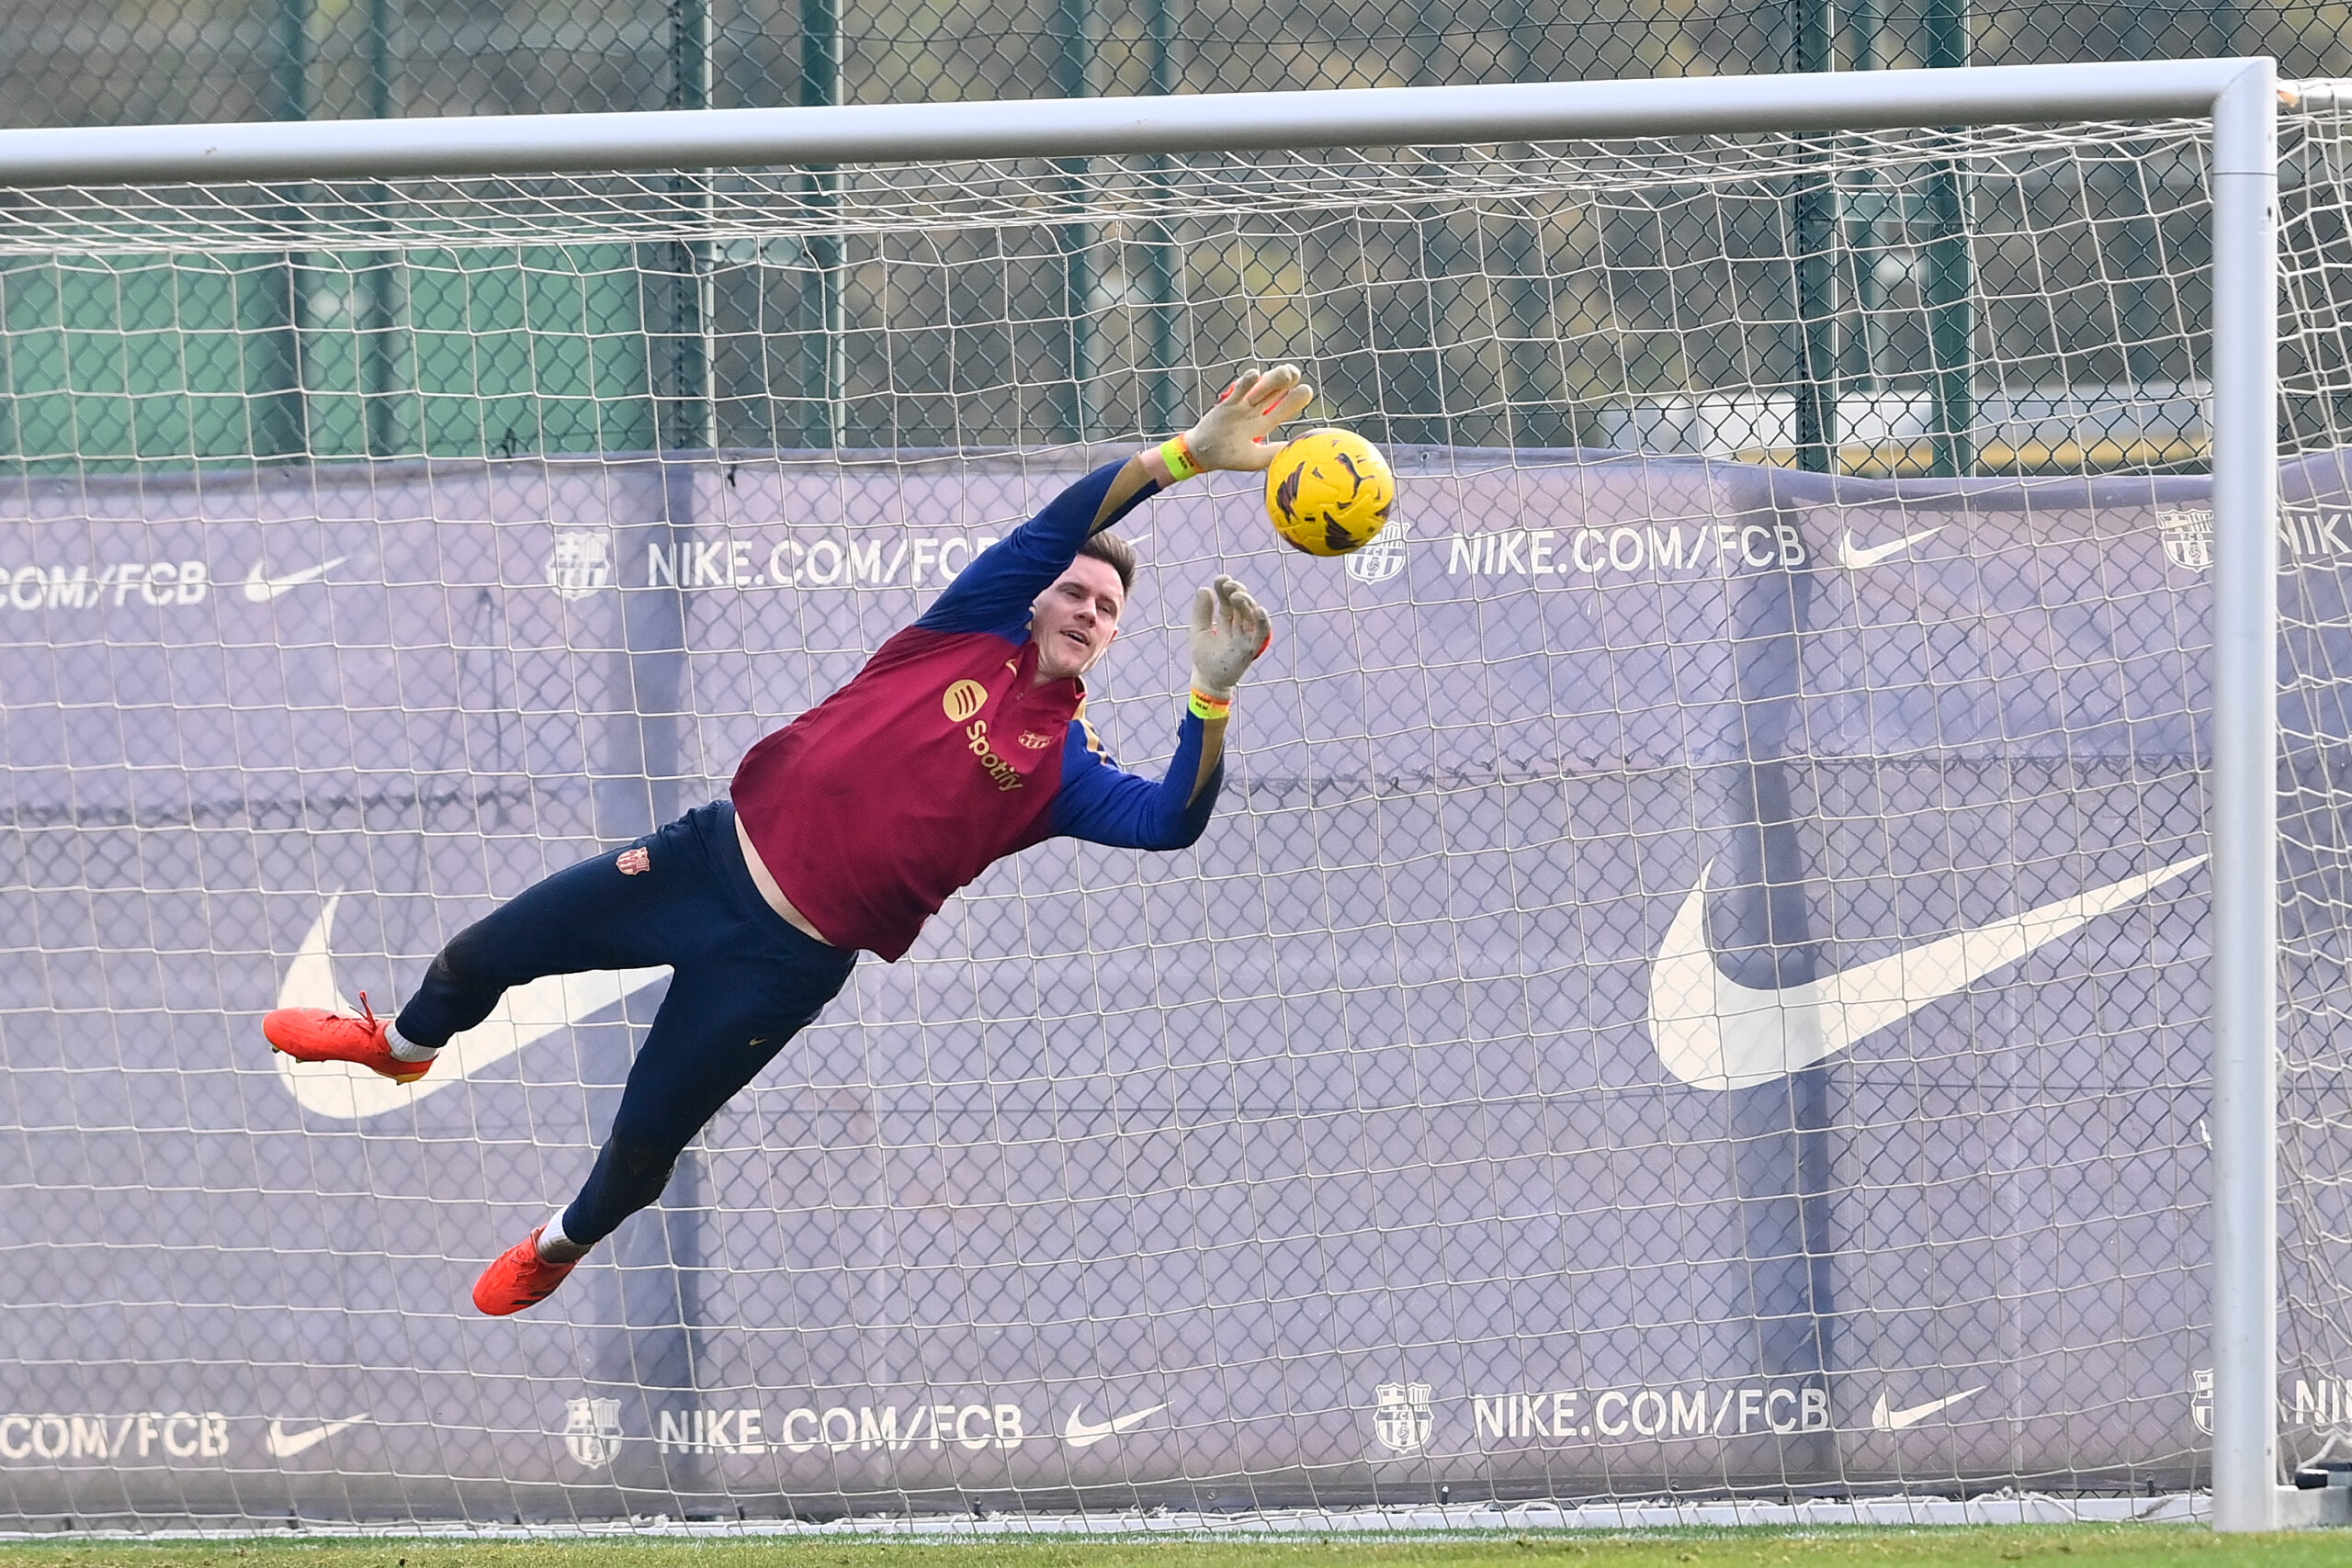 Barcelona's German goalkeeper #01 Marc-Andre ter Stegen attends a training session at the Joan Gamper training ground in Sant Joan Despi, near Barcelona, on January 30, 2024. Only a few months after lifting the Spanish title, Barcelona coach Xavi Hernandez dramatically announced he would walk away from the club at the end of the season. After Villarreal stunned Barcelona on January 28 with a 5-3 win which left the champions third, and 10 points behind La Liga leaders Real Madrid, Xavi said he was stepping down in June.